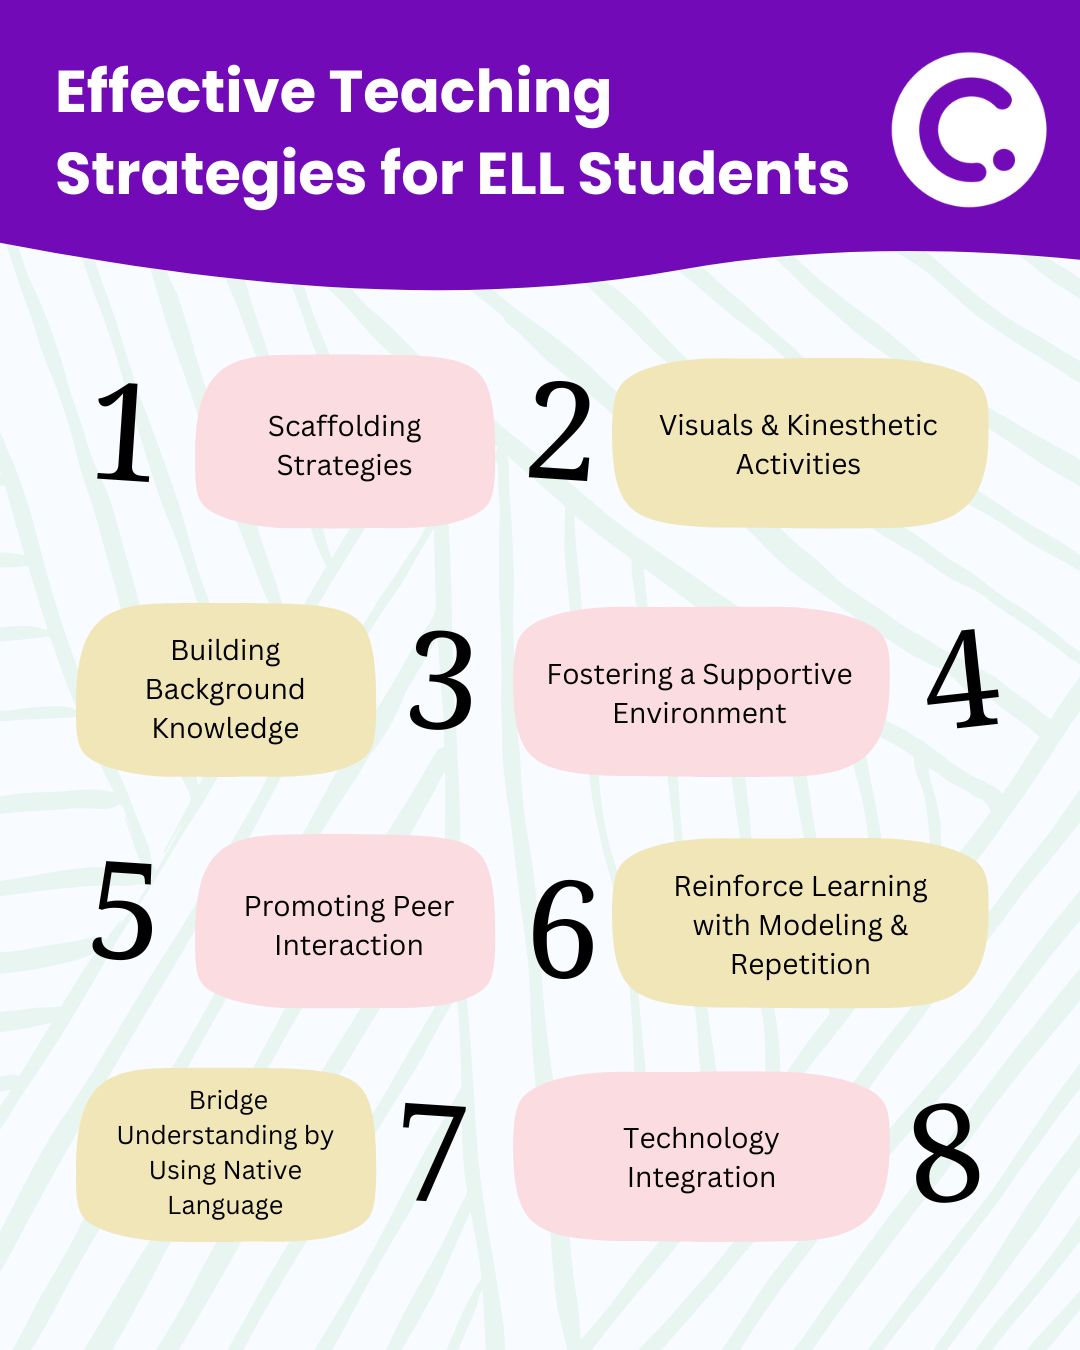 8 strategies for ELL students